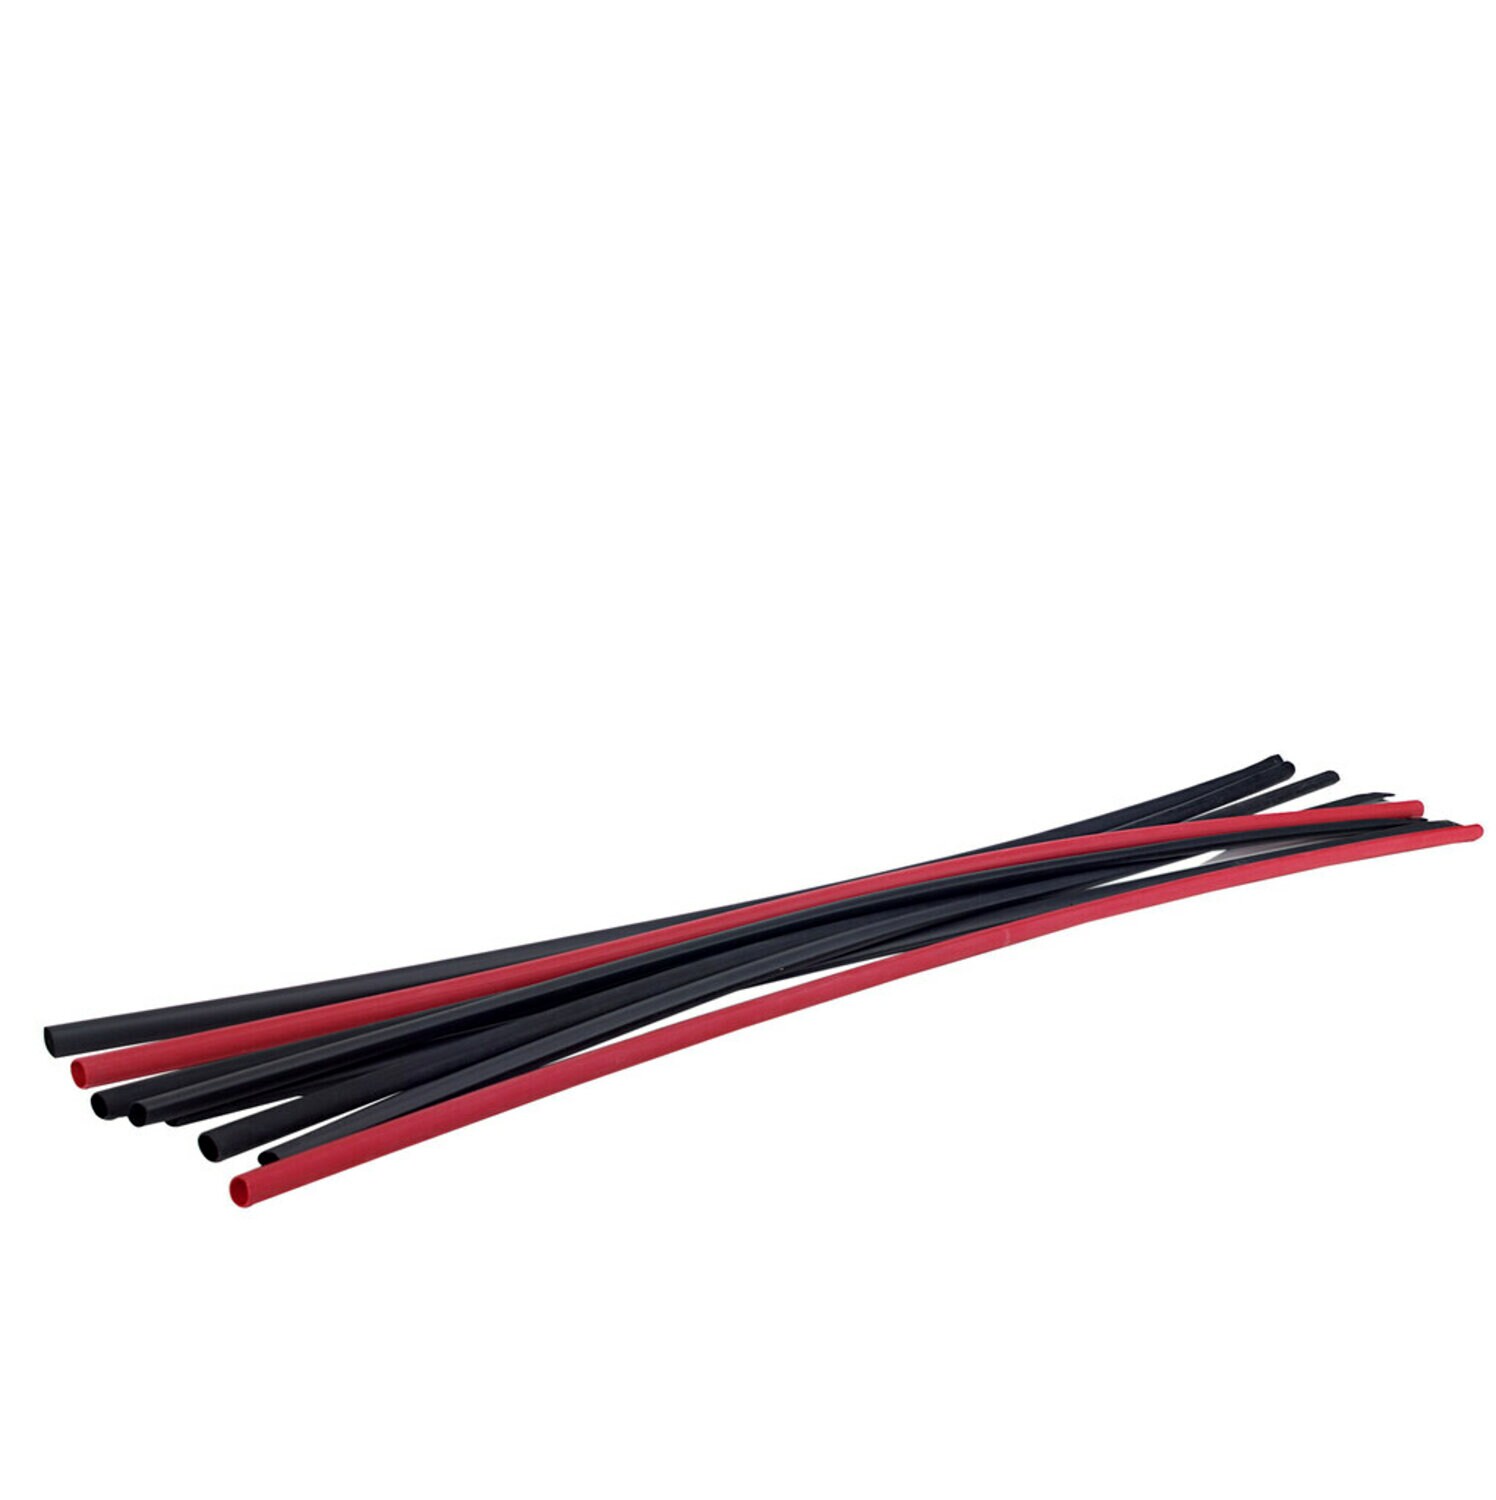 7000133551 - 3M Heat Shrink Thin-Wall Tubing FP-301-1/4-48"-Black-Hdr-12 Pcs, 48 in
Length sticks with header label, 12 pieces/case